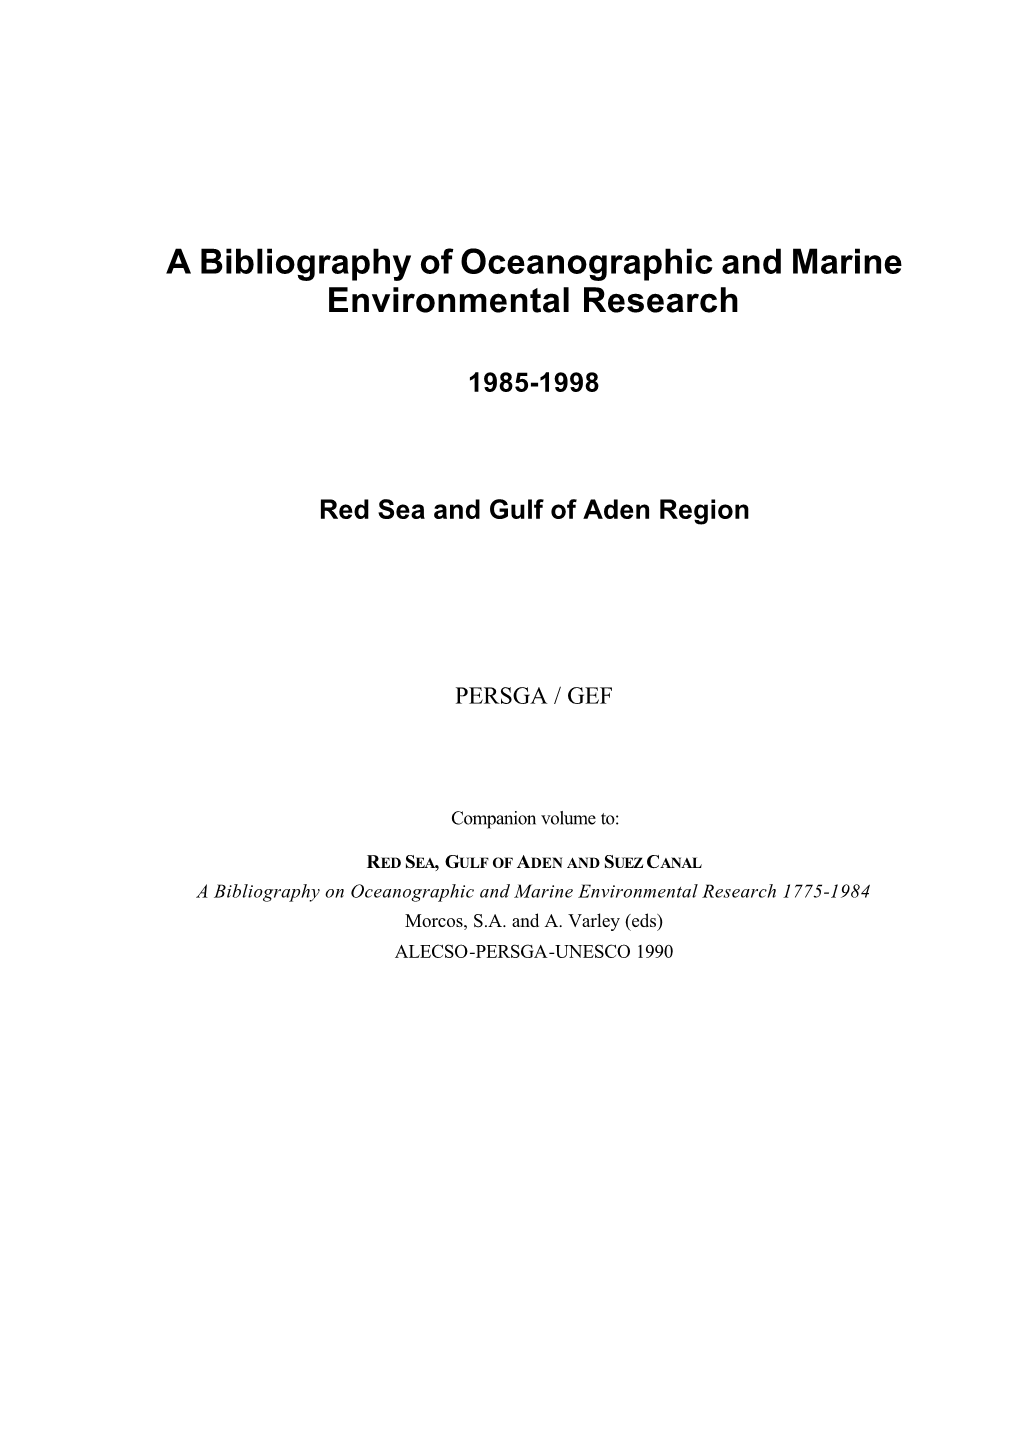 A Bibliography of Oceanographic and Marine Environmental Research